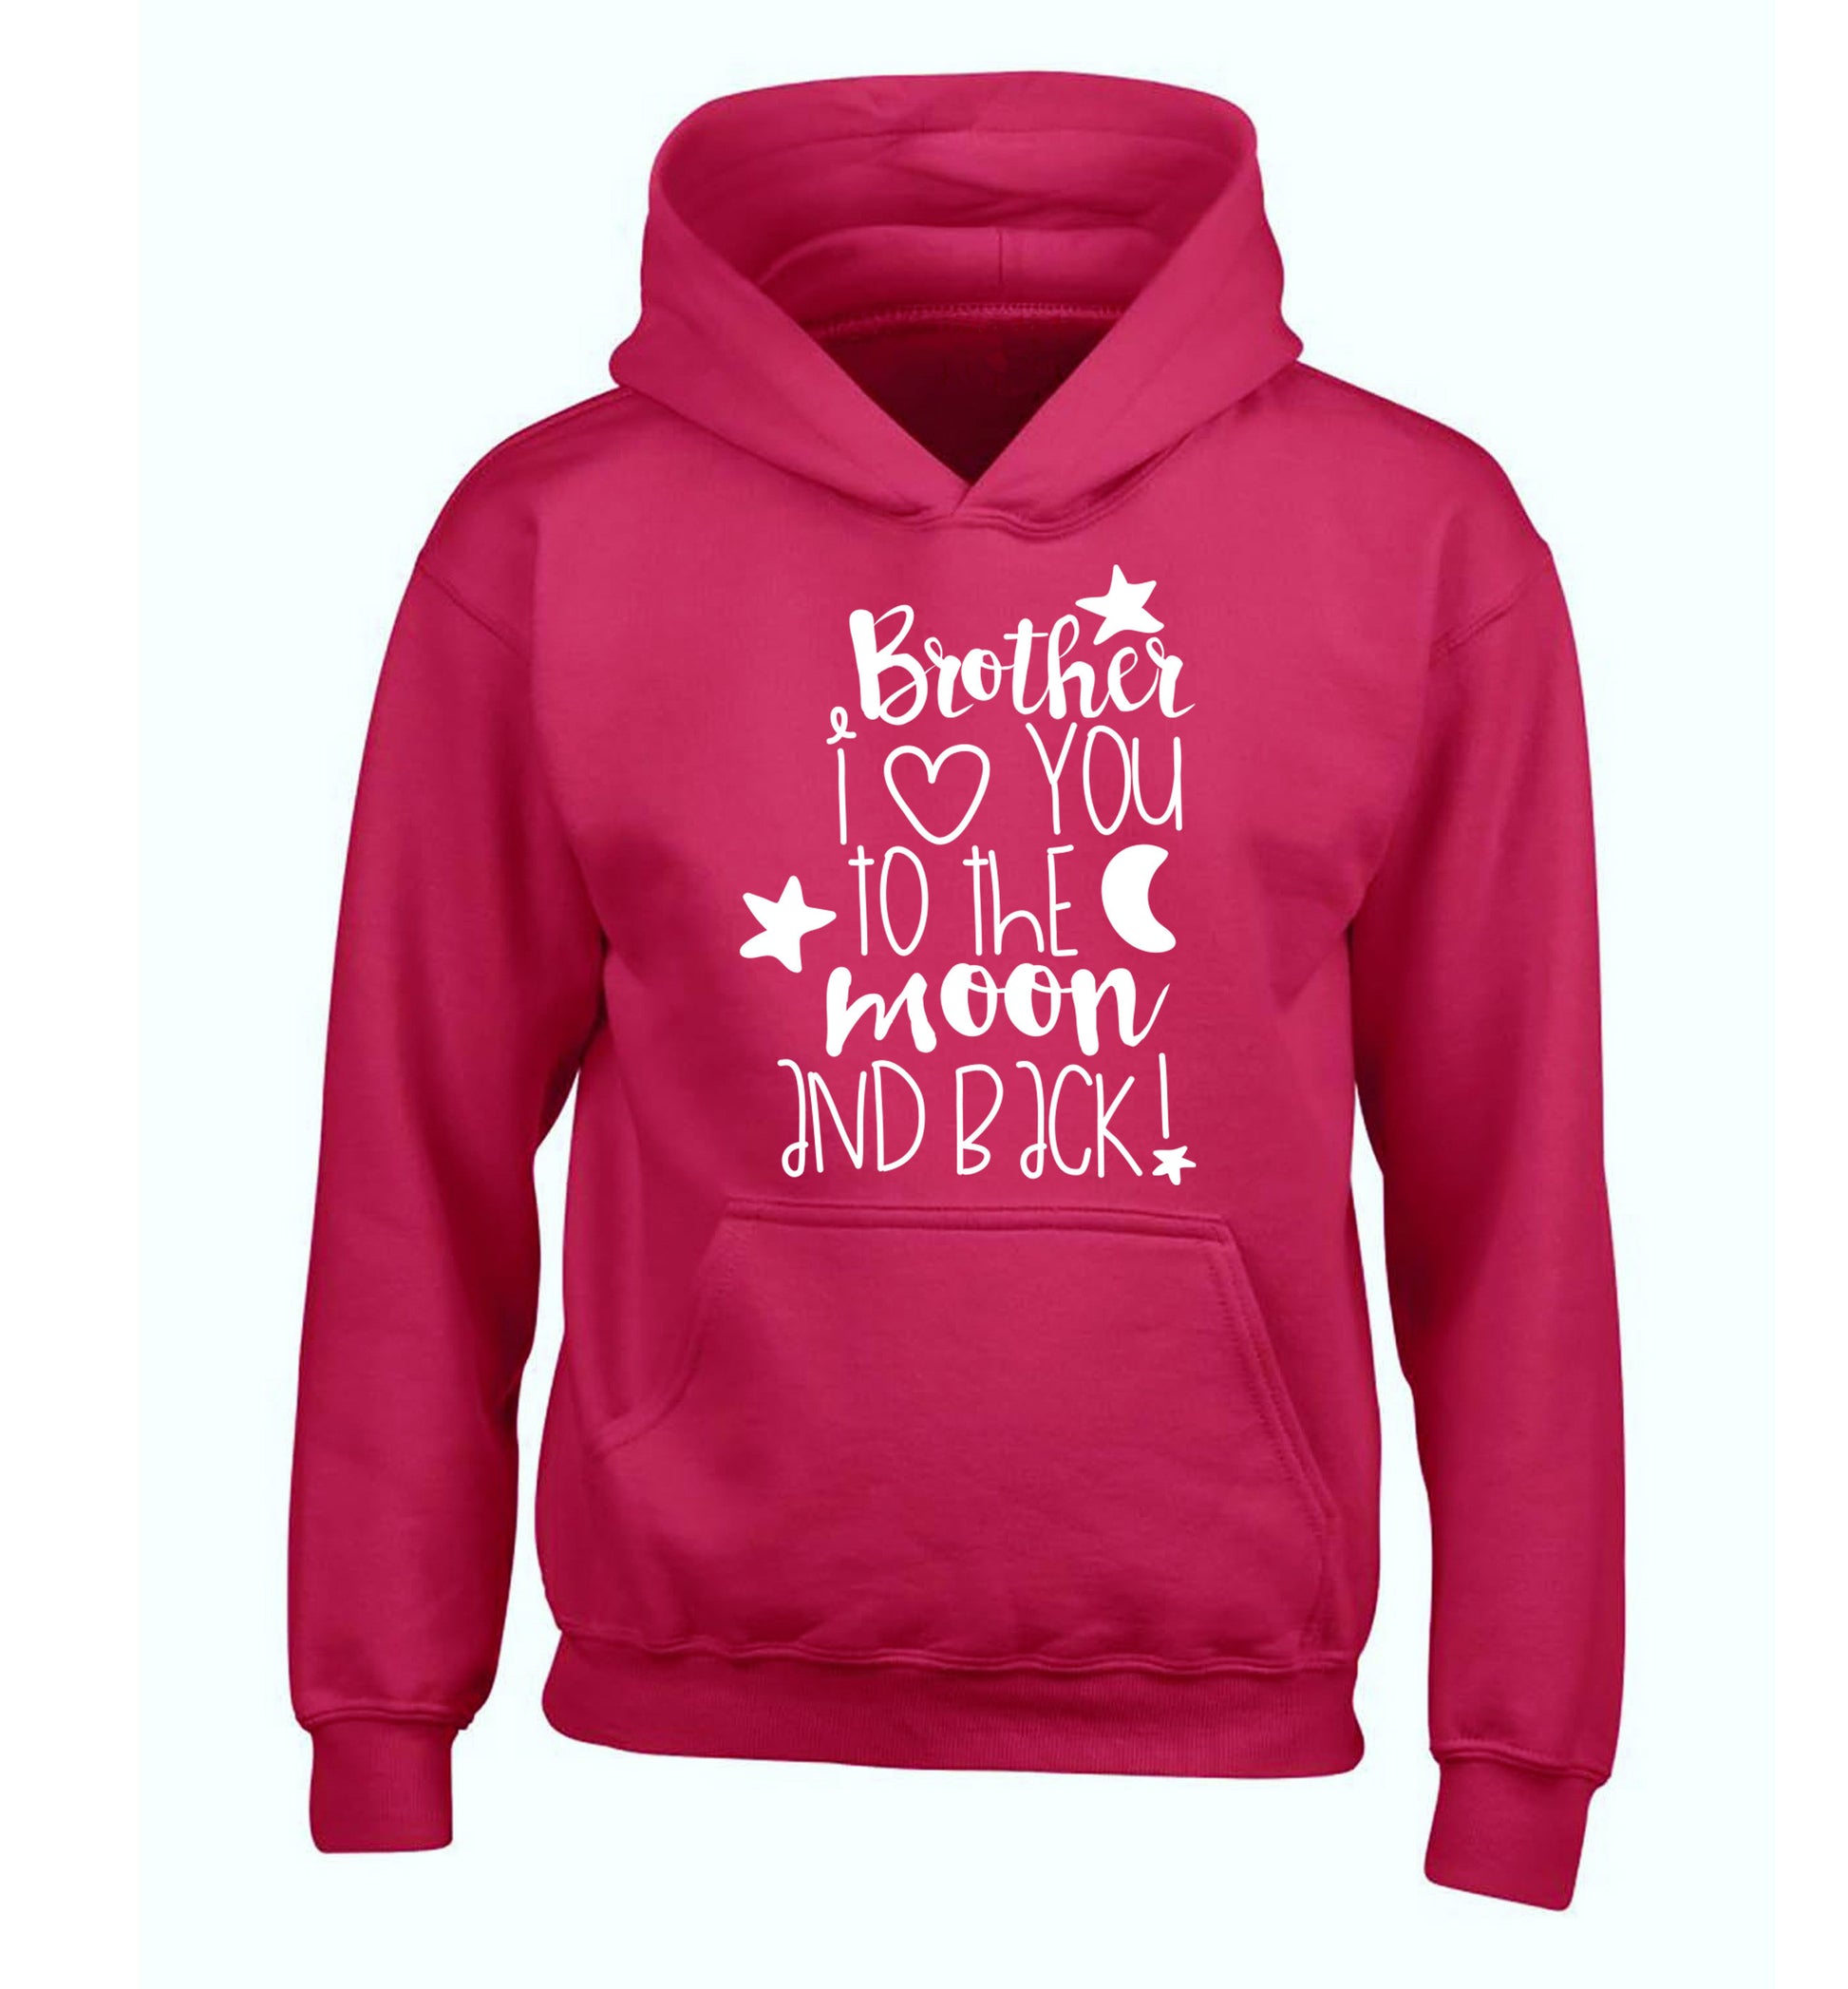 Brother I love you to the moon and back children's pink hoodie 12-14 Years